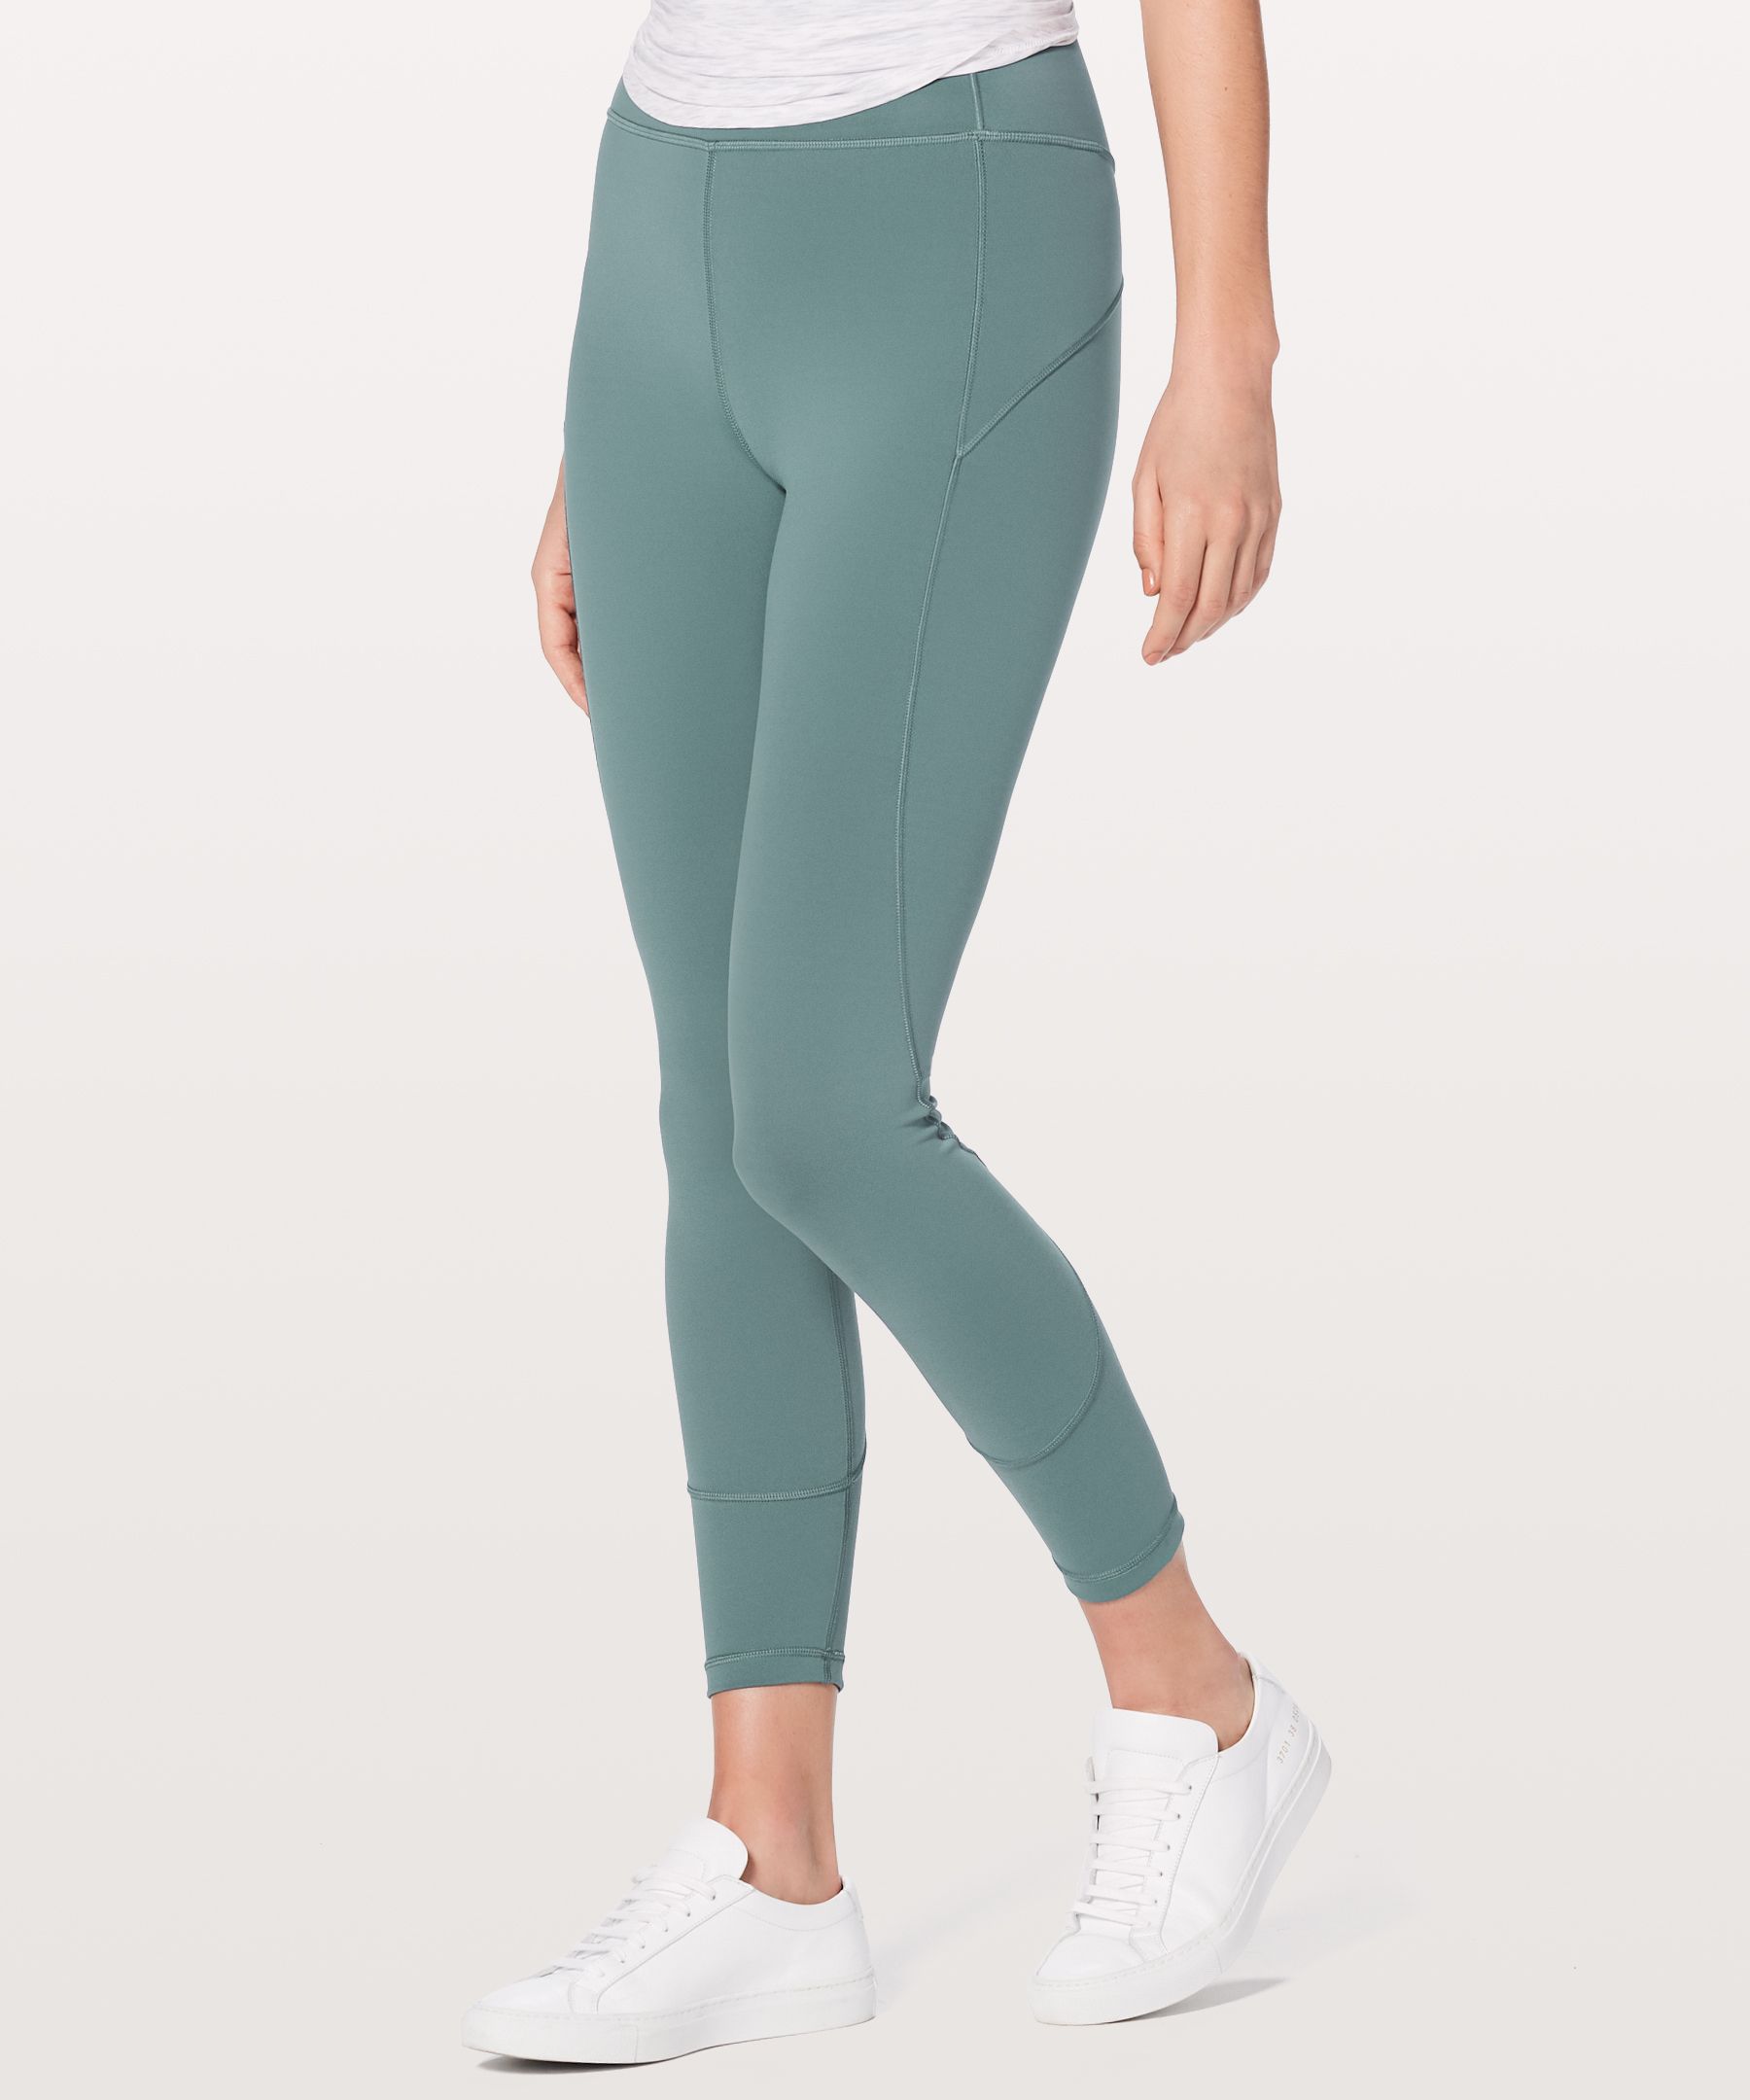 lululemon in movement tight review